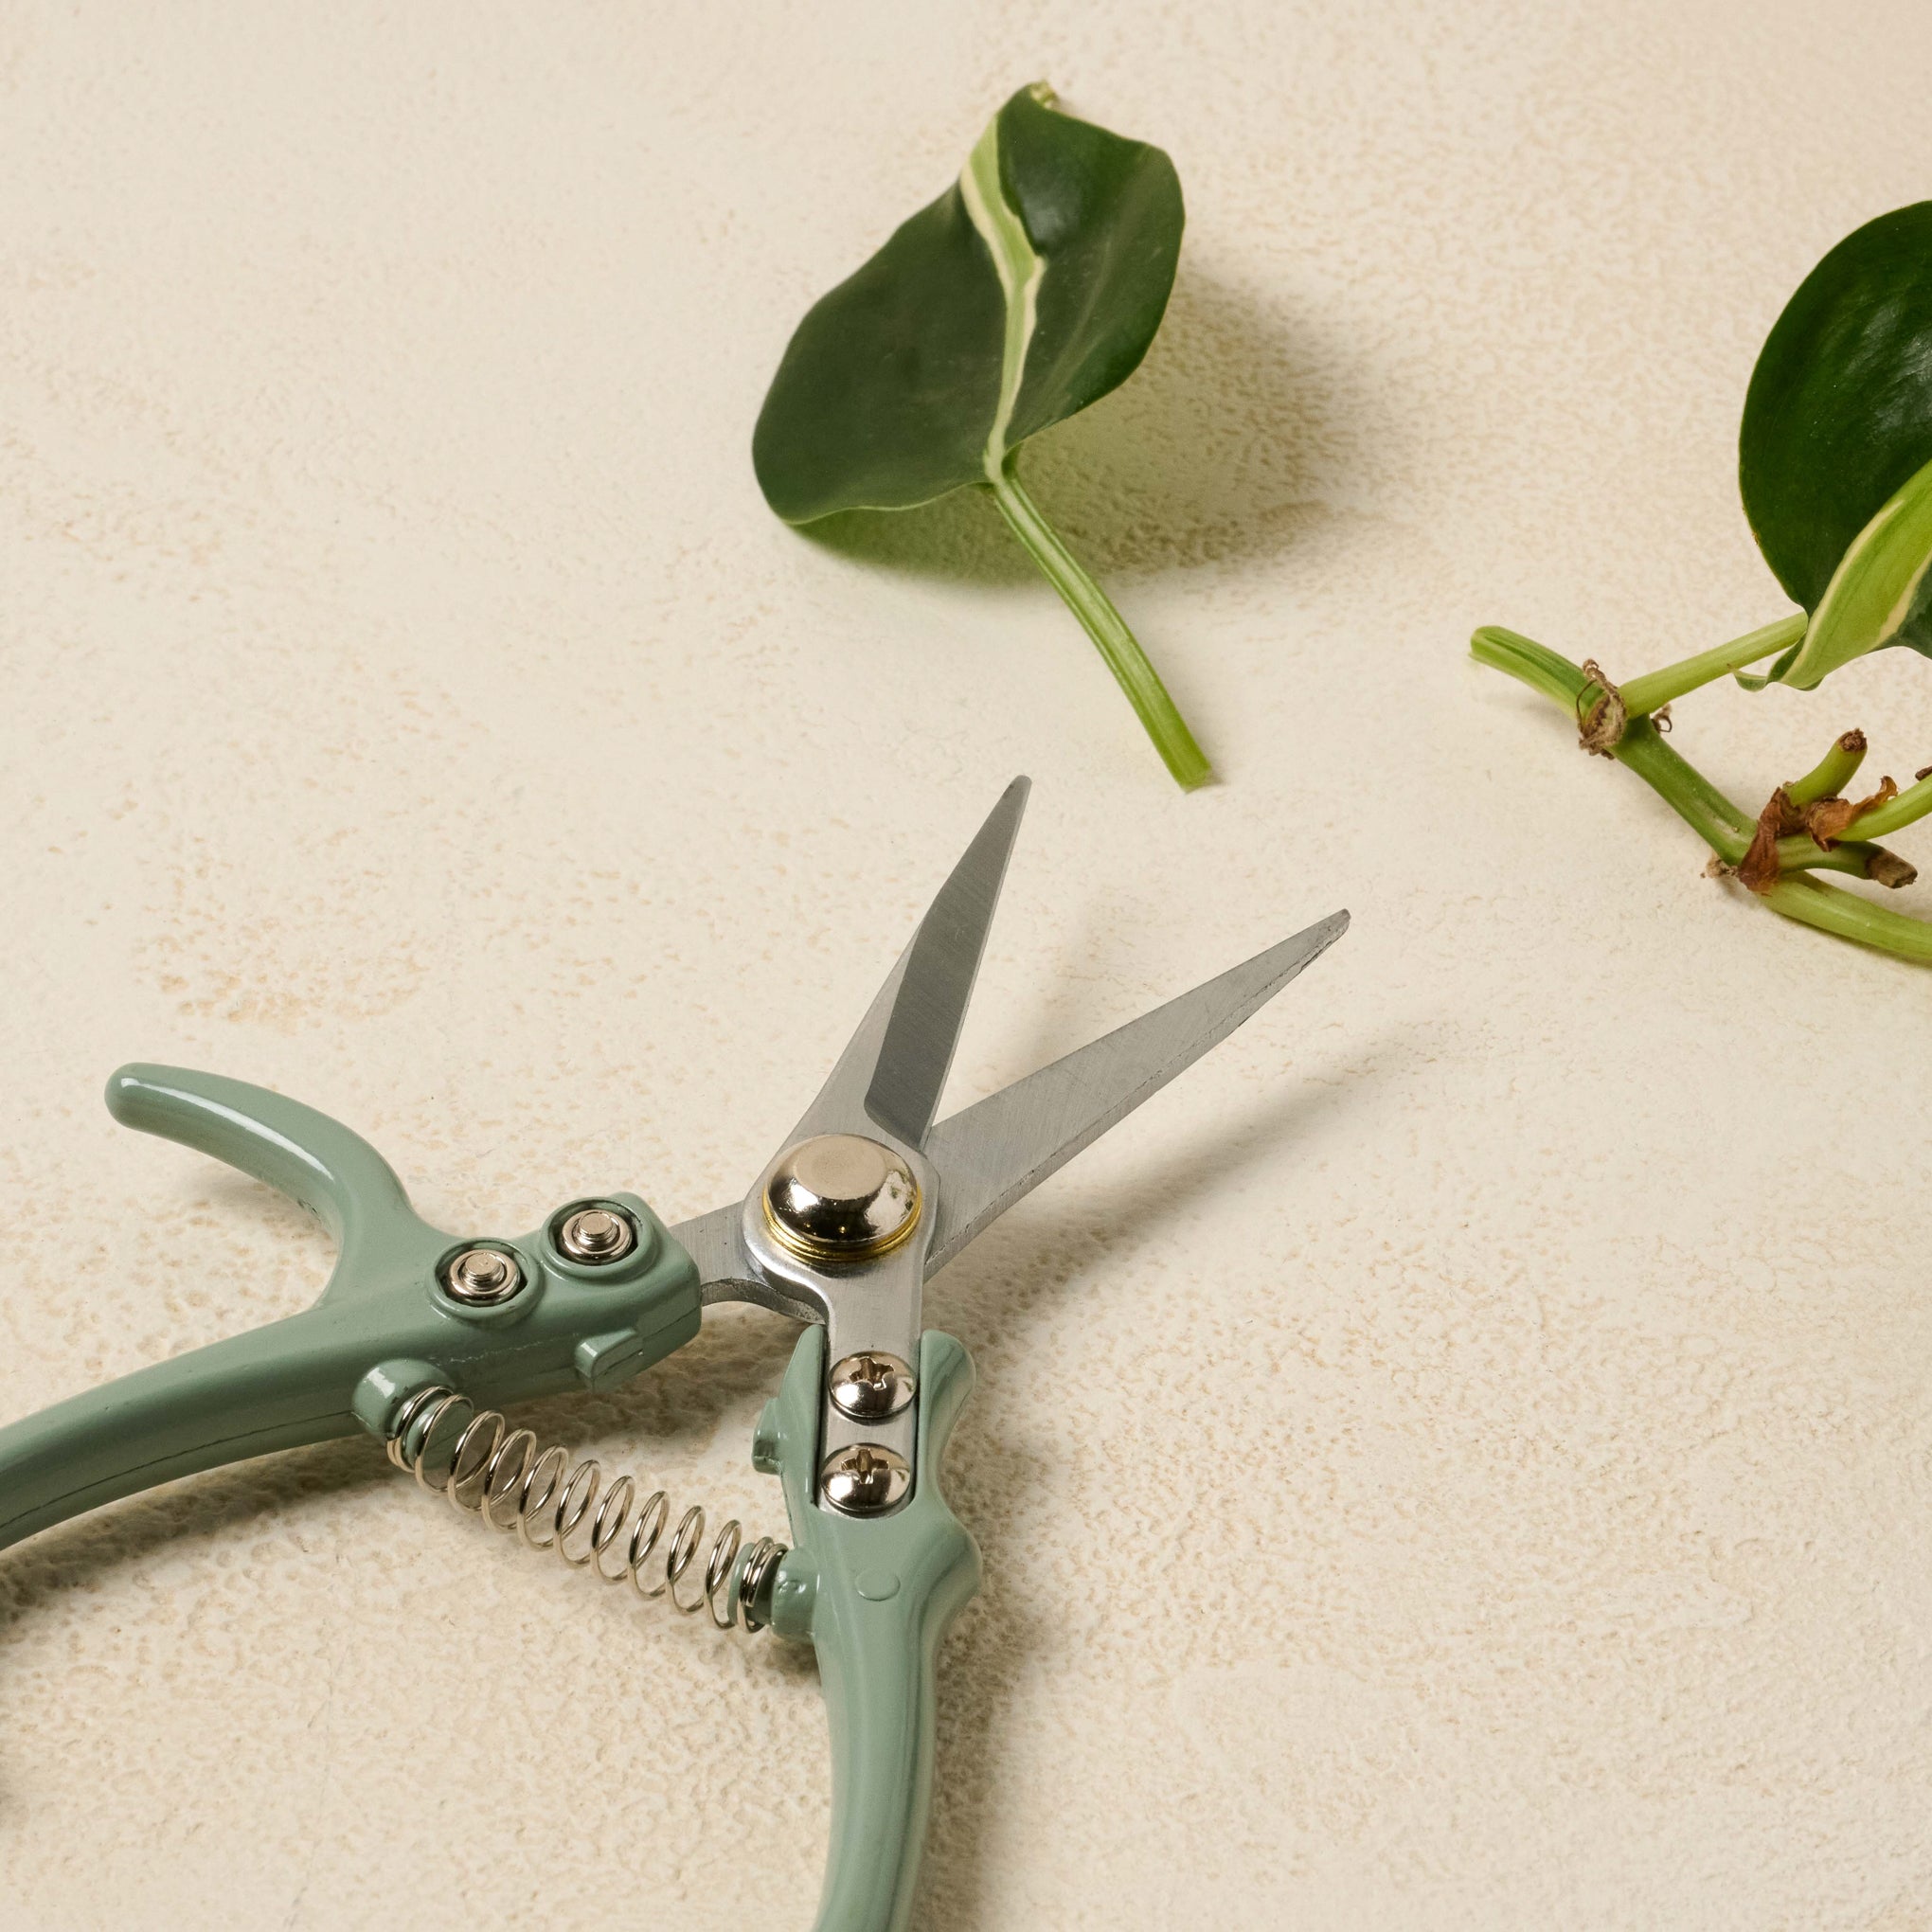 Pale Mint Pruning Shears next to cut leaves